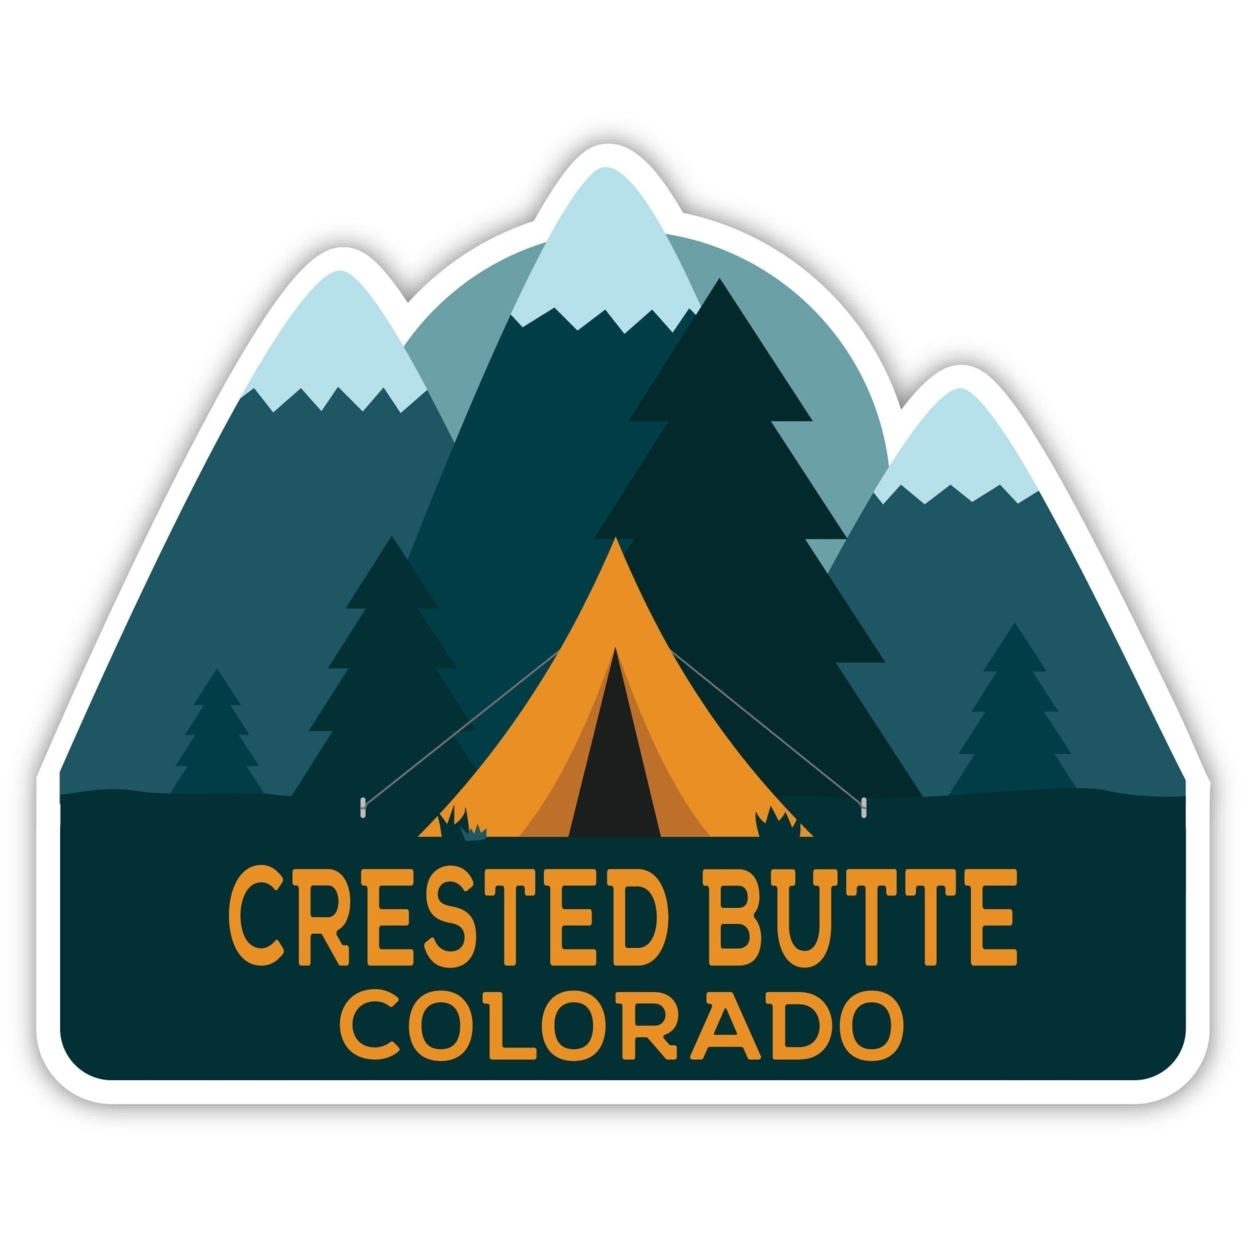 Crested Butte Colorado Souvenir Decorative Stickers (Choose Theme And Size) - 4-Pack, 12-Inch, Adventures Awaits